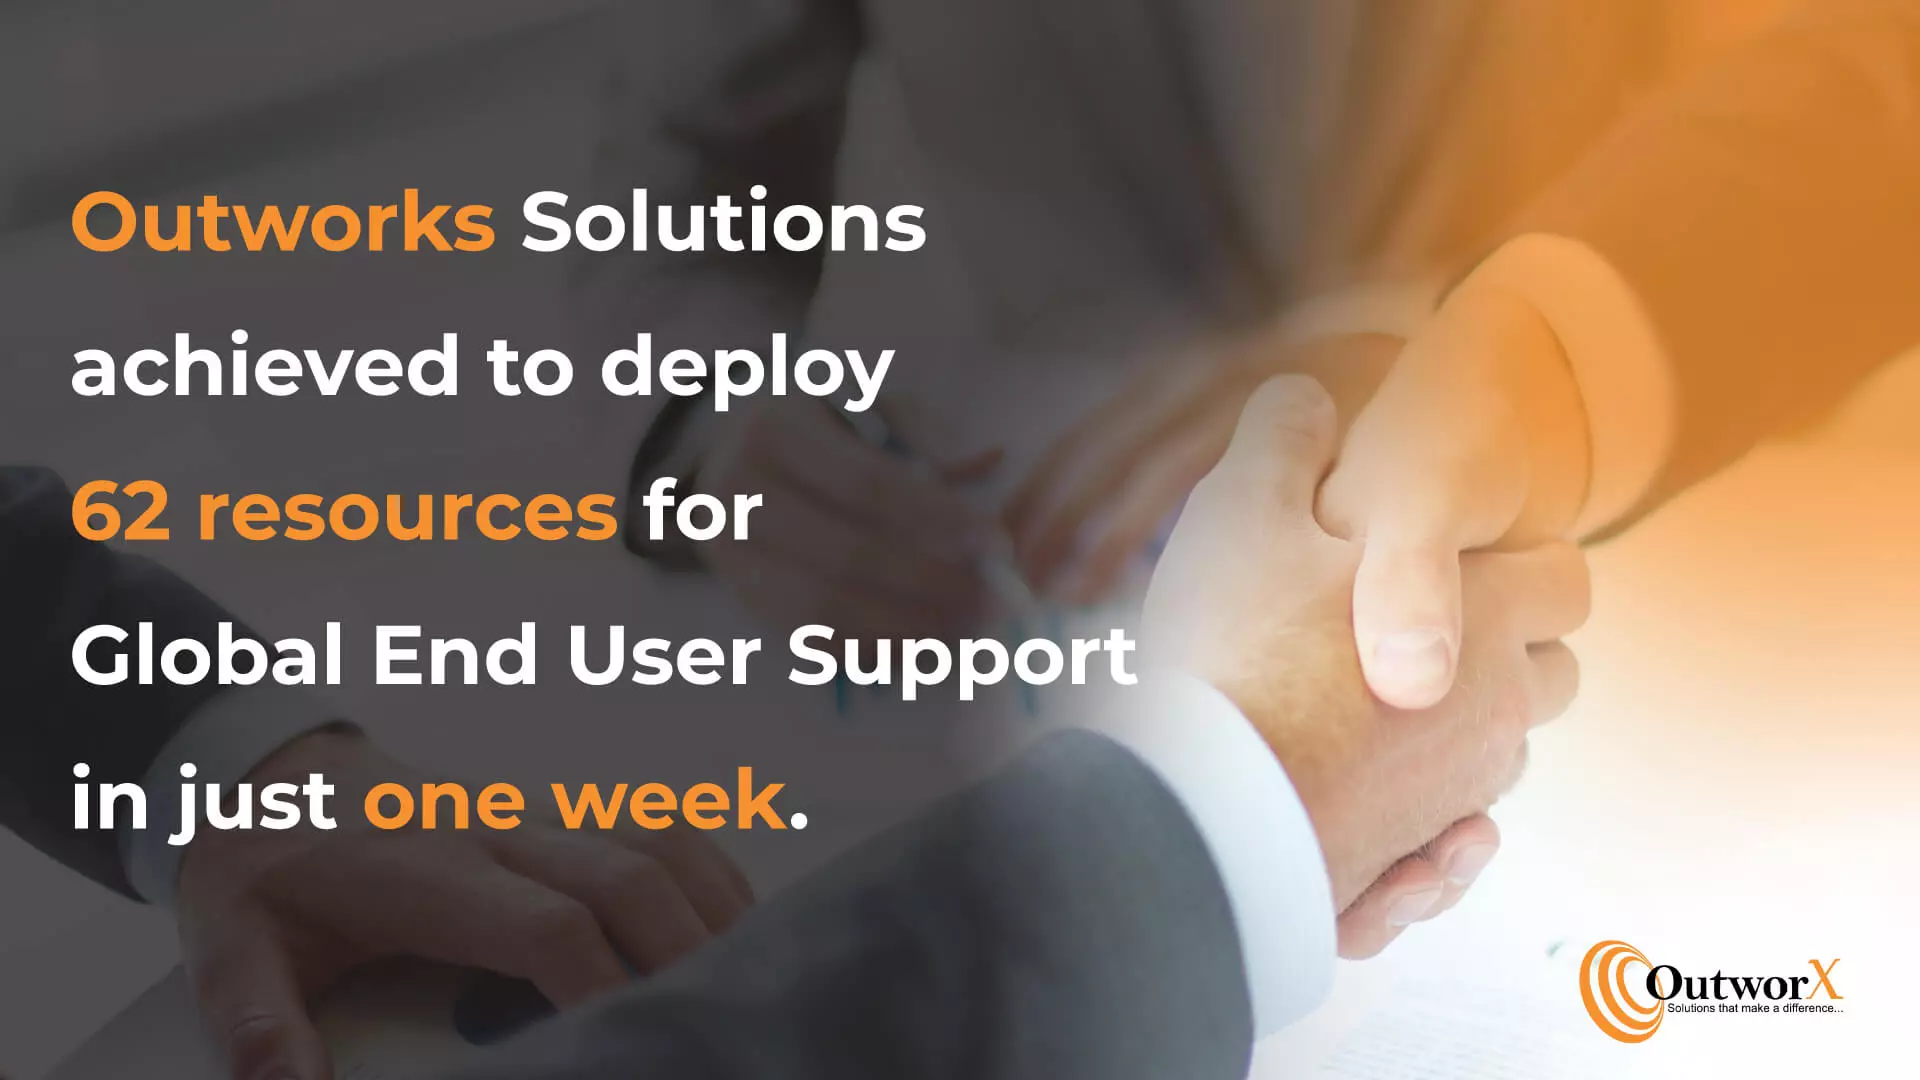 end user computing, end user support, end user computing services, end user services, end user support services, it end user support, achievements by outworks solutions